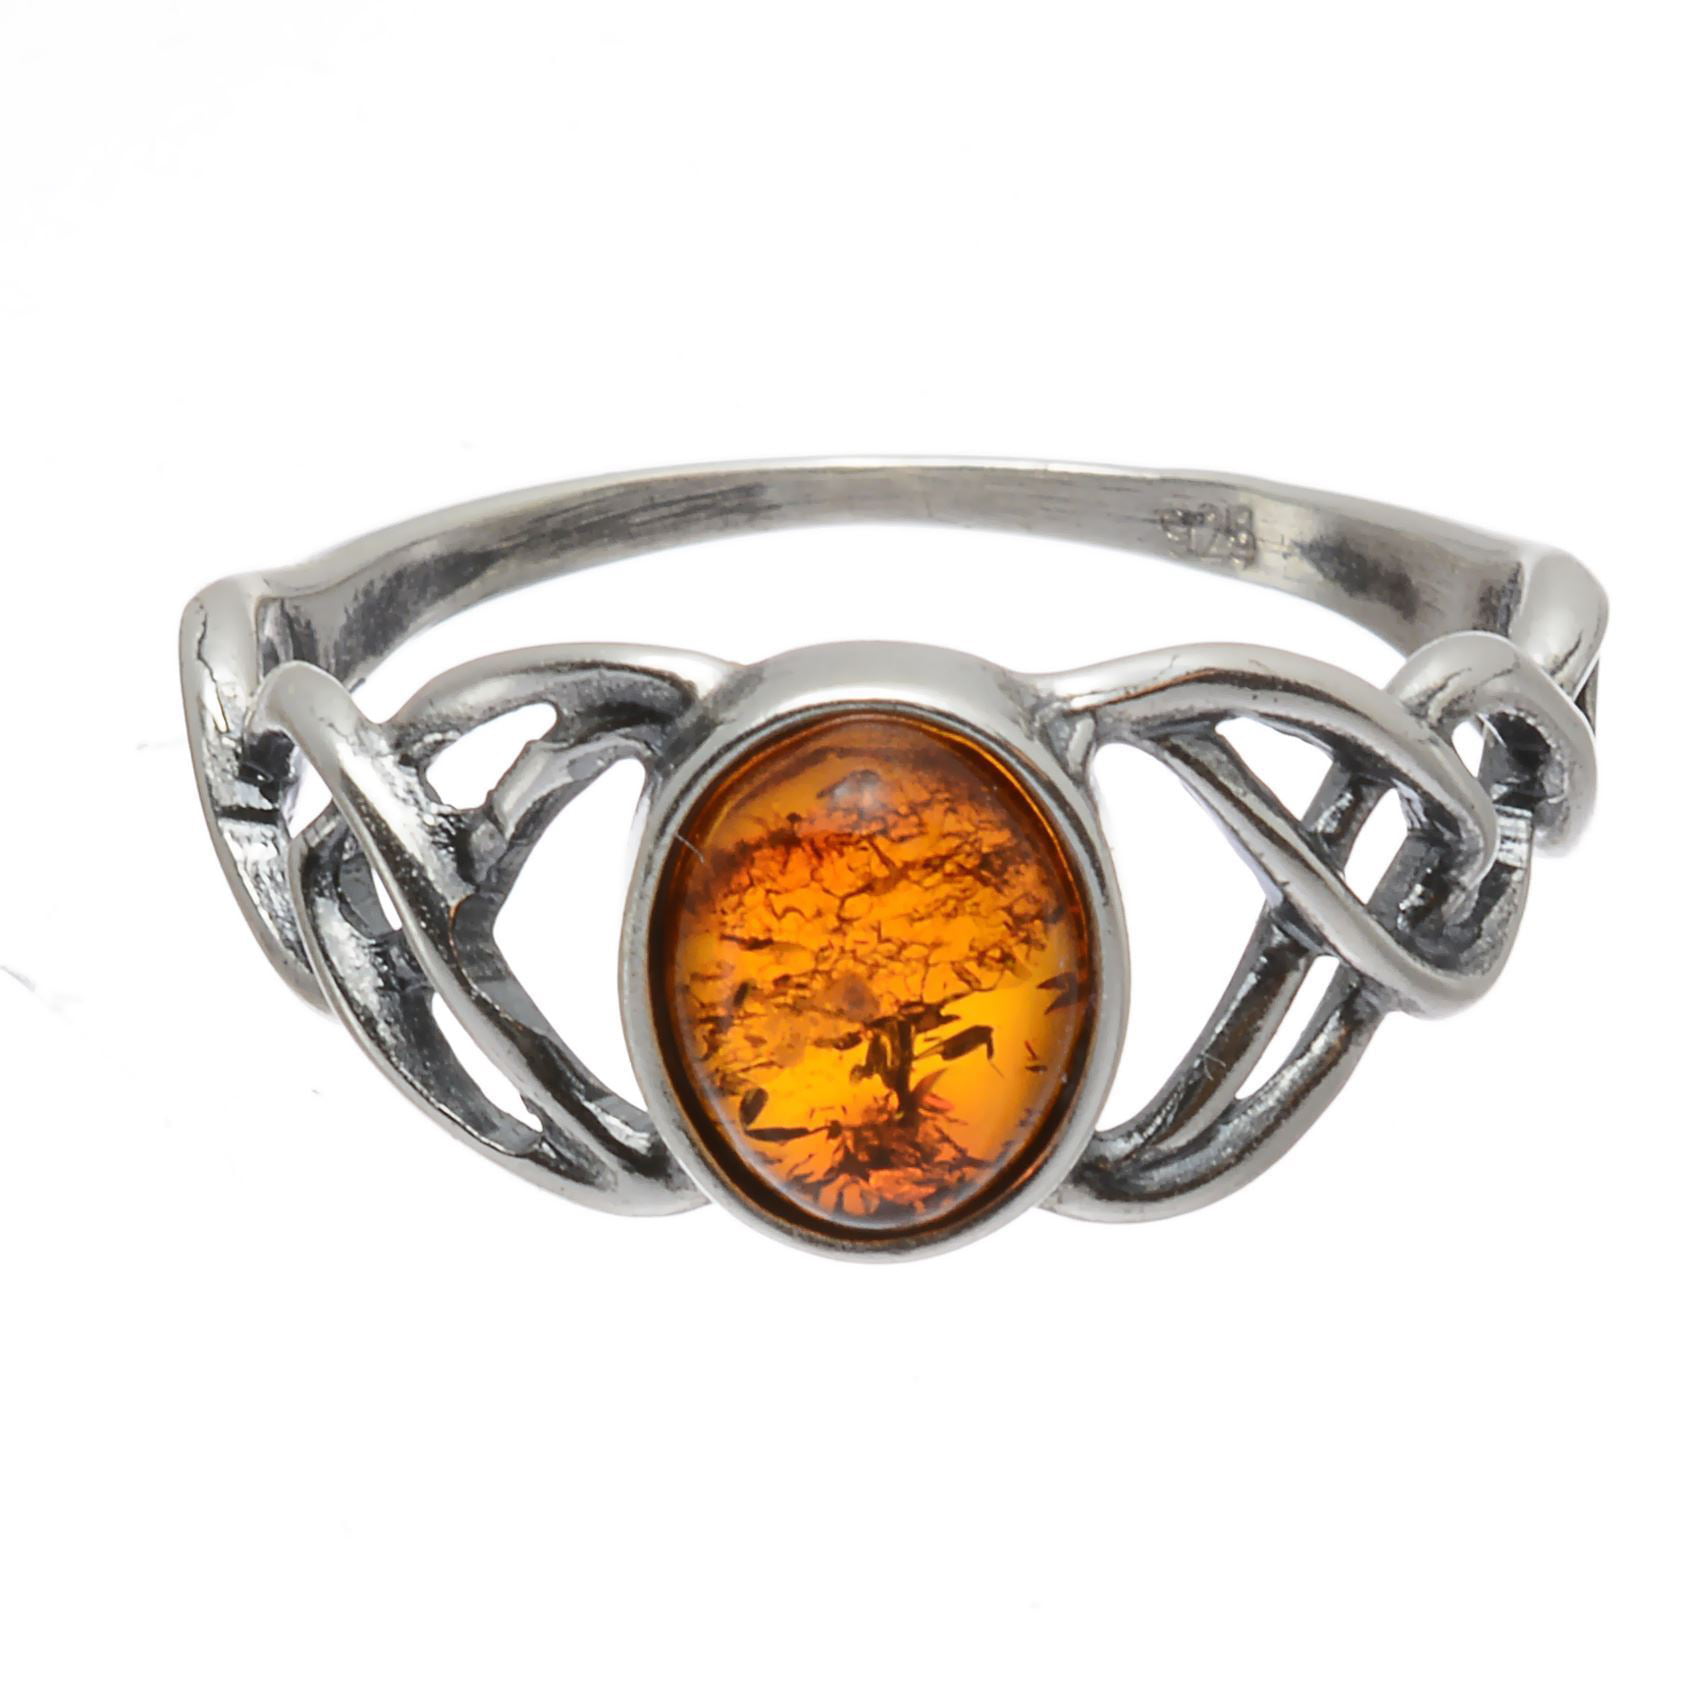 Sale Genuine Baltic Honey Amber Chevron Ring in 925 Sterling Silver Size 9